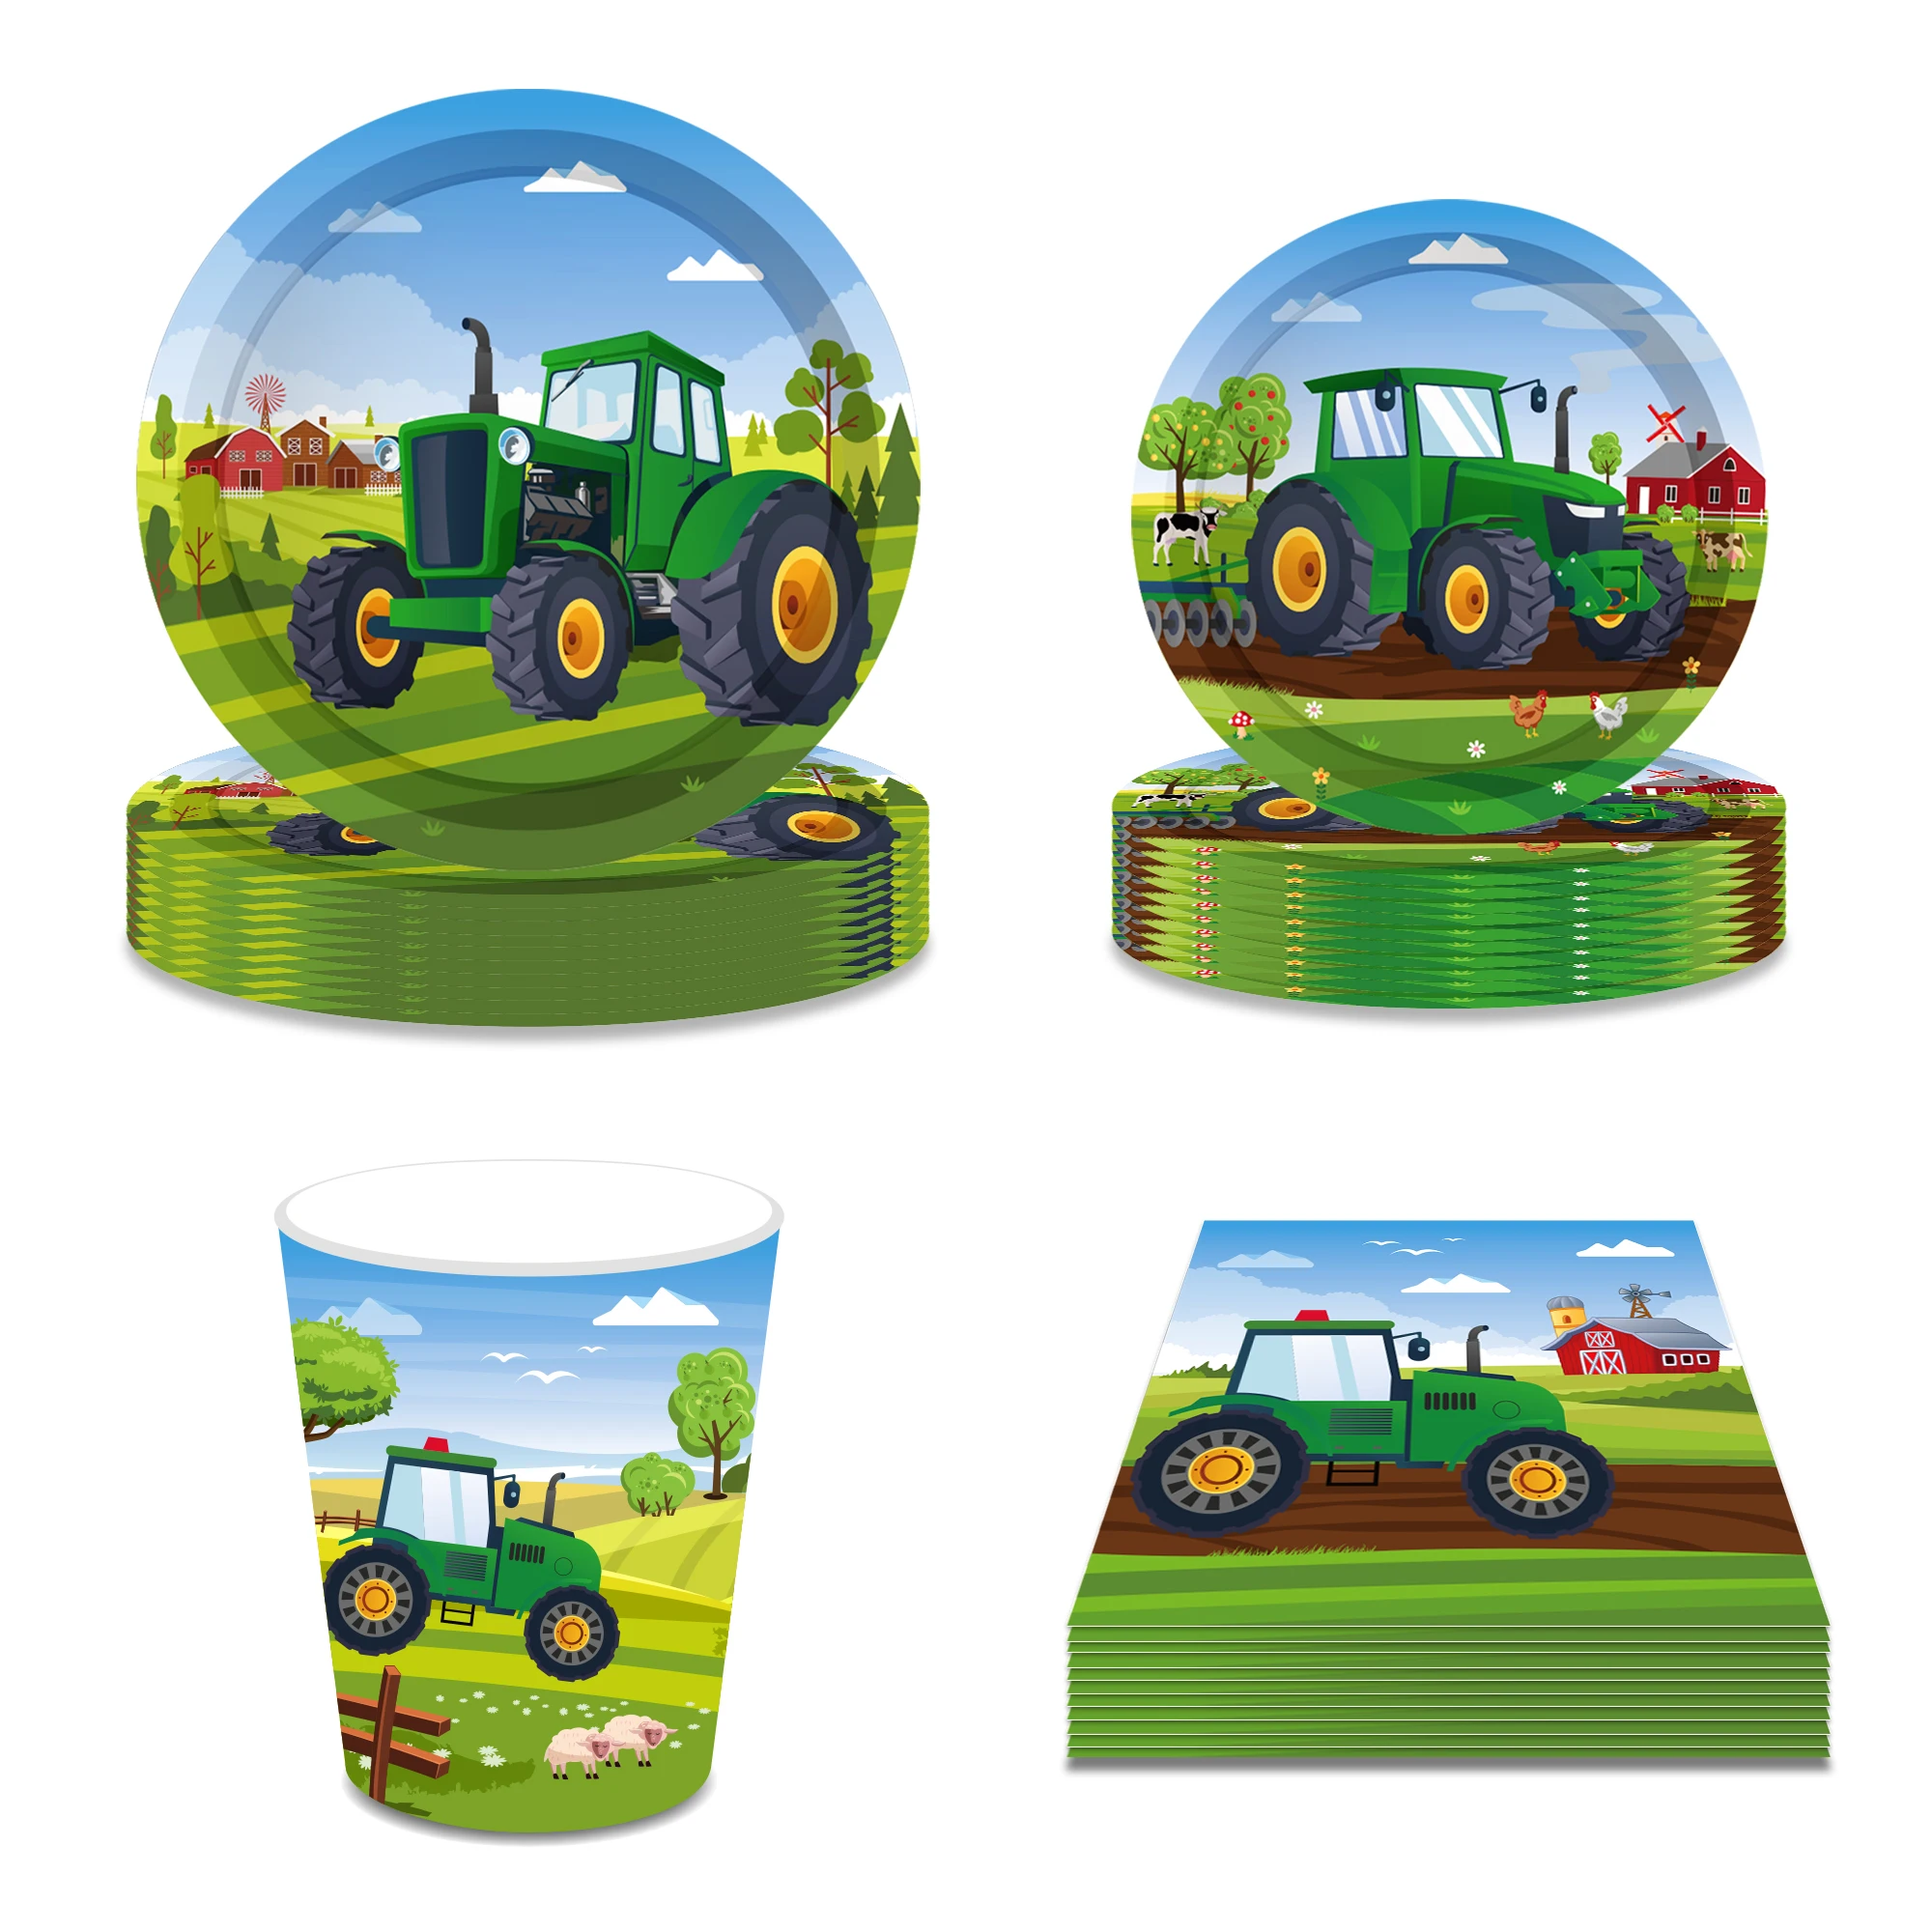 

Cartoon Farm Tractor Disposable Tableware Sets Birthday Decoration Plates Cups Paper Napkins Baby Shower Party Cutlery Supplies